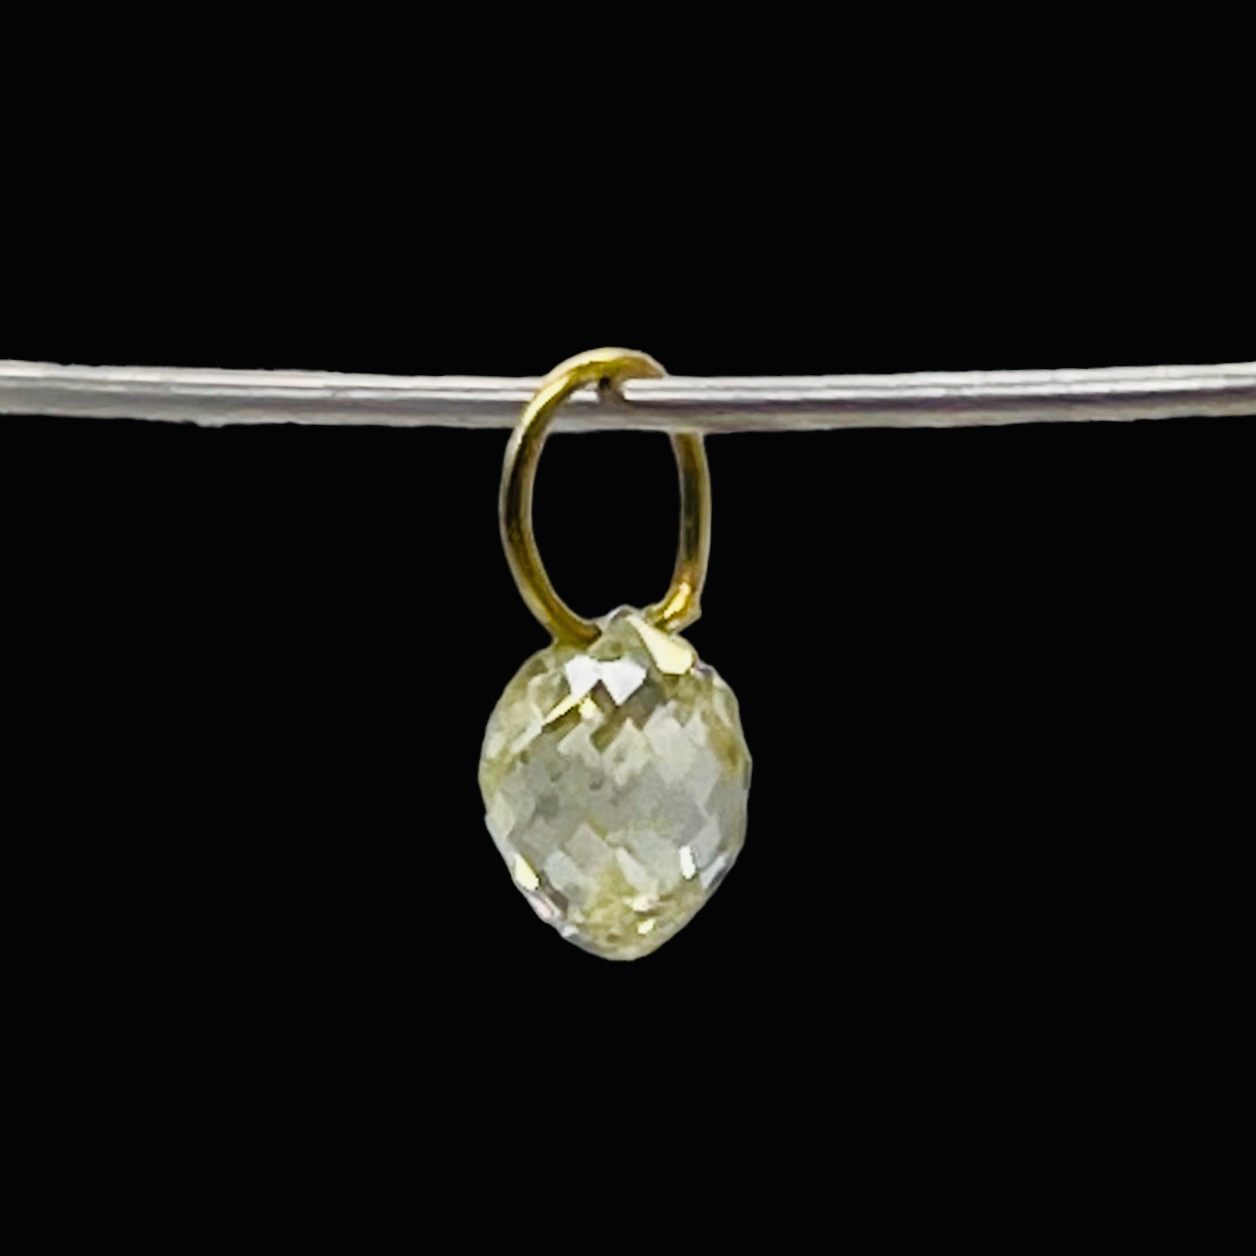 Natural Canary 0.35cts Diamond 18K Gold Pendant | 3.75x3x2.75mm | - image 3 of 12